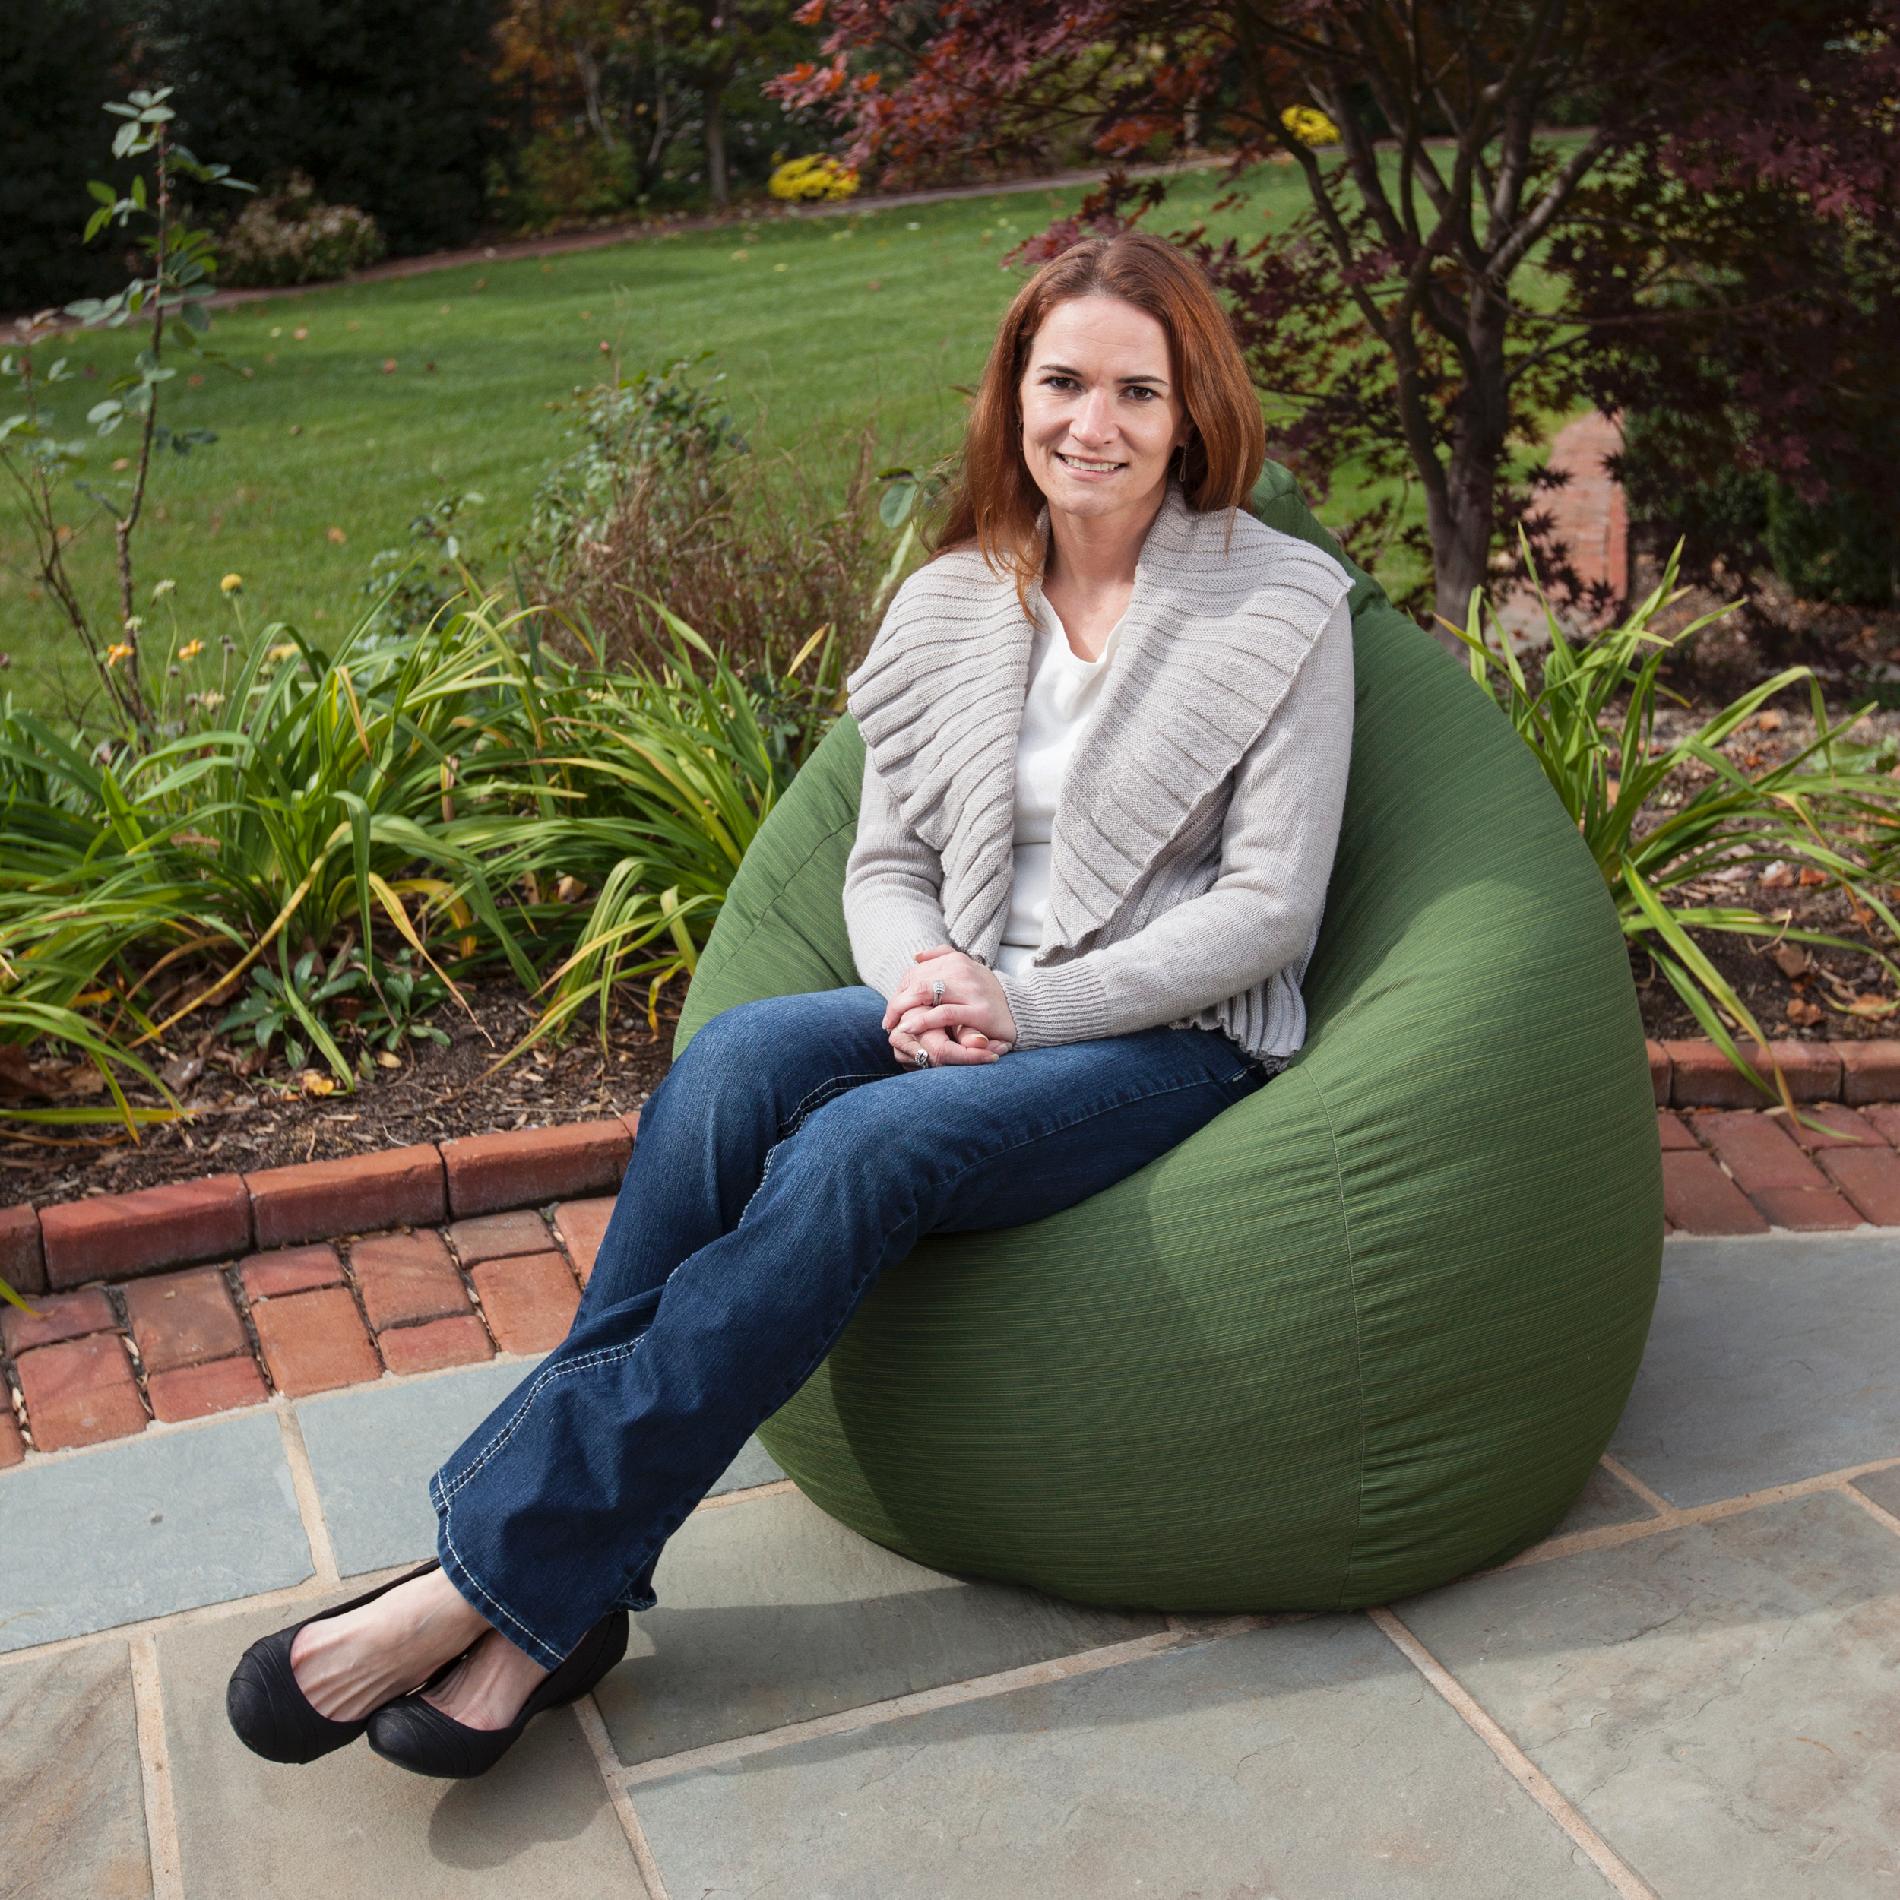 Gold Medal Outdoor/Indoor Sunbrella&#8482; Weather Resistant Bean Bag - Contemporary Collection